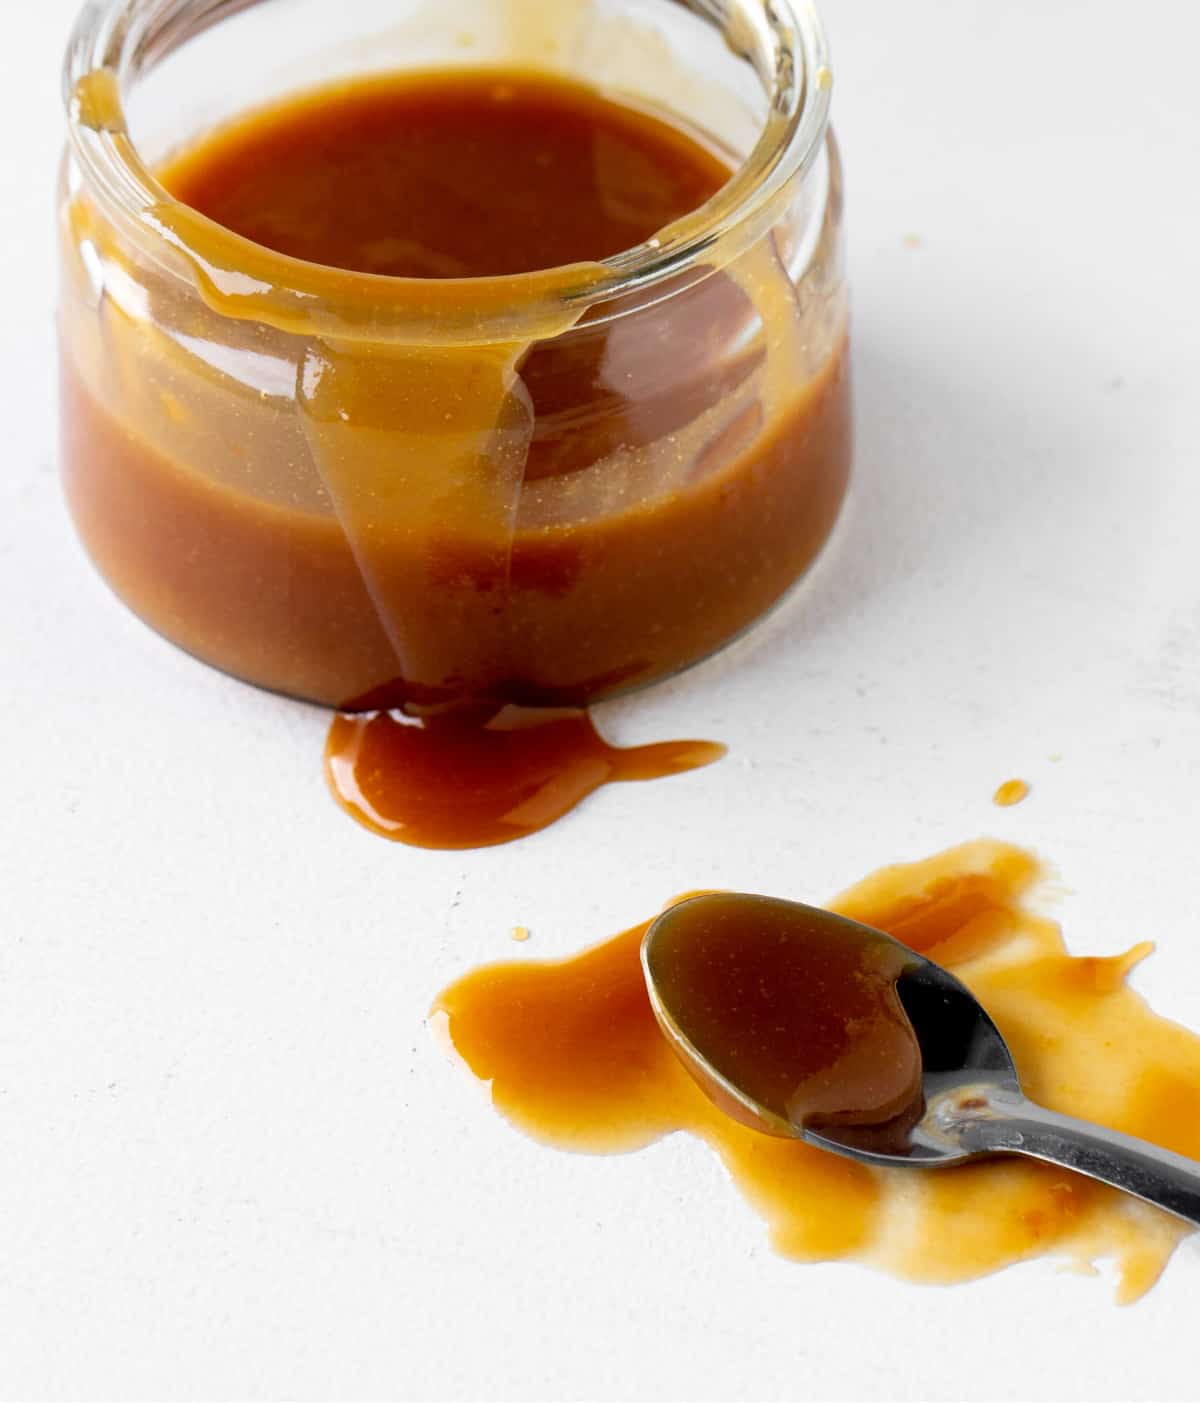 Silver spoon and glass jar dripping dulce de leche on a white surface.